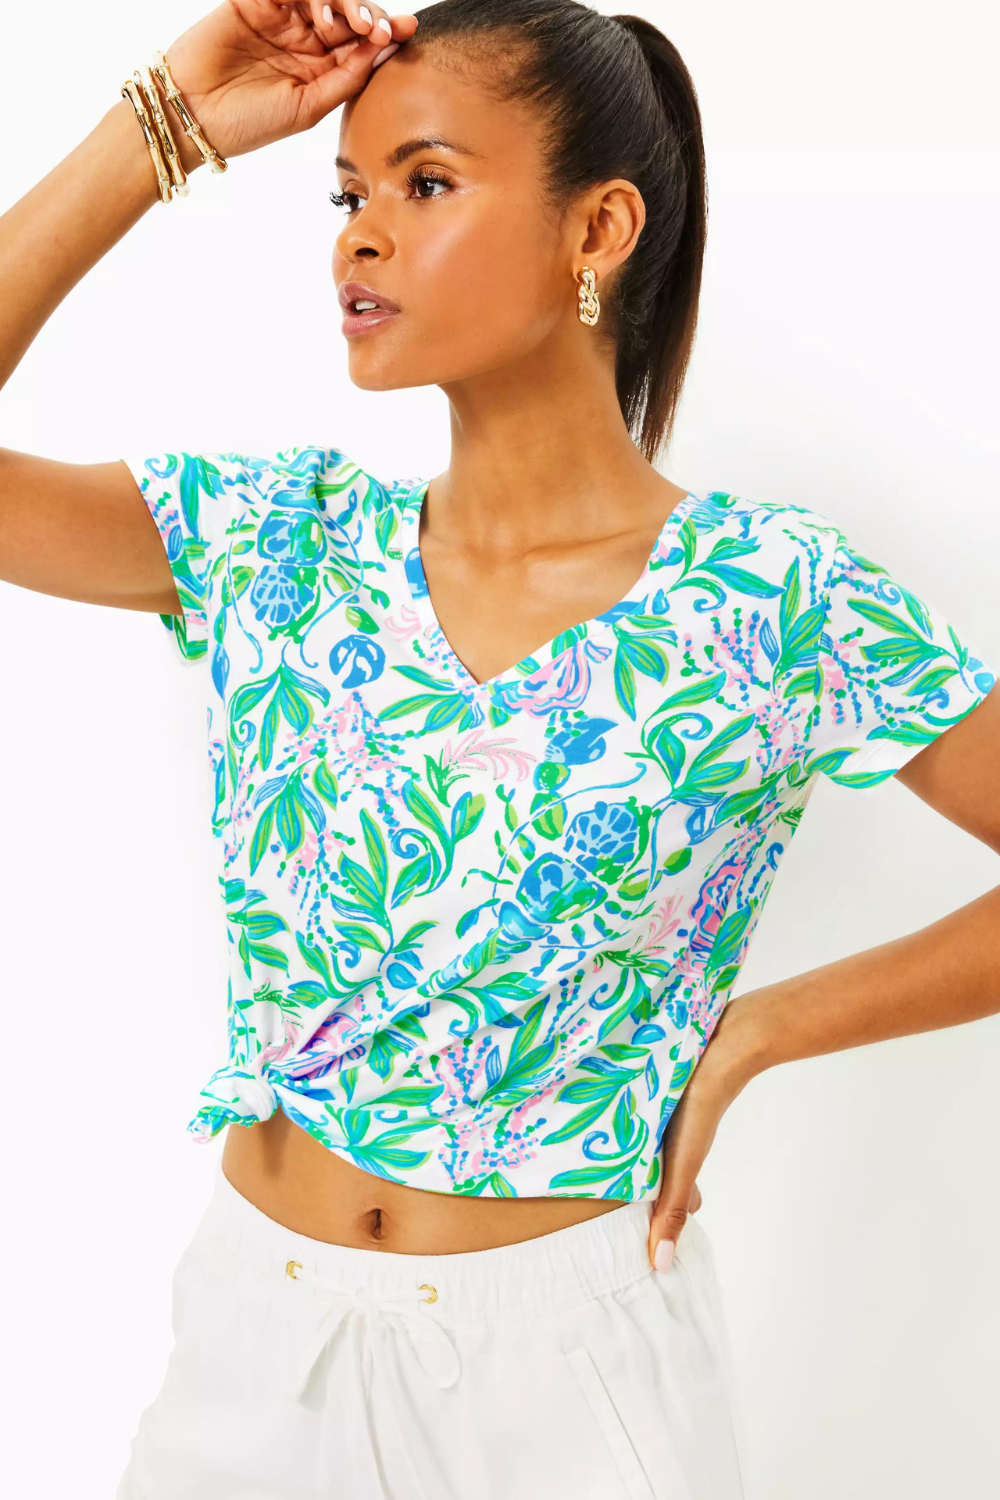 Lilly Pulitzer Meredith Tee - Just a Pinch